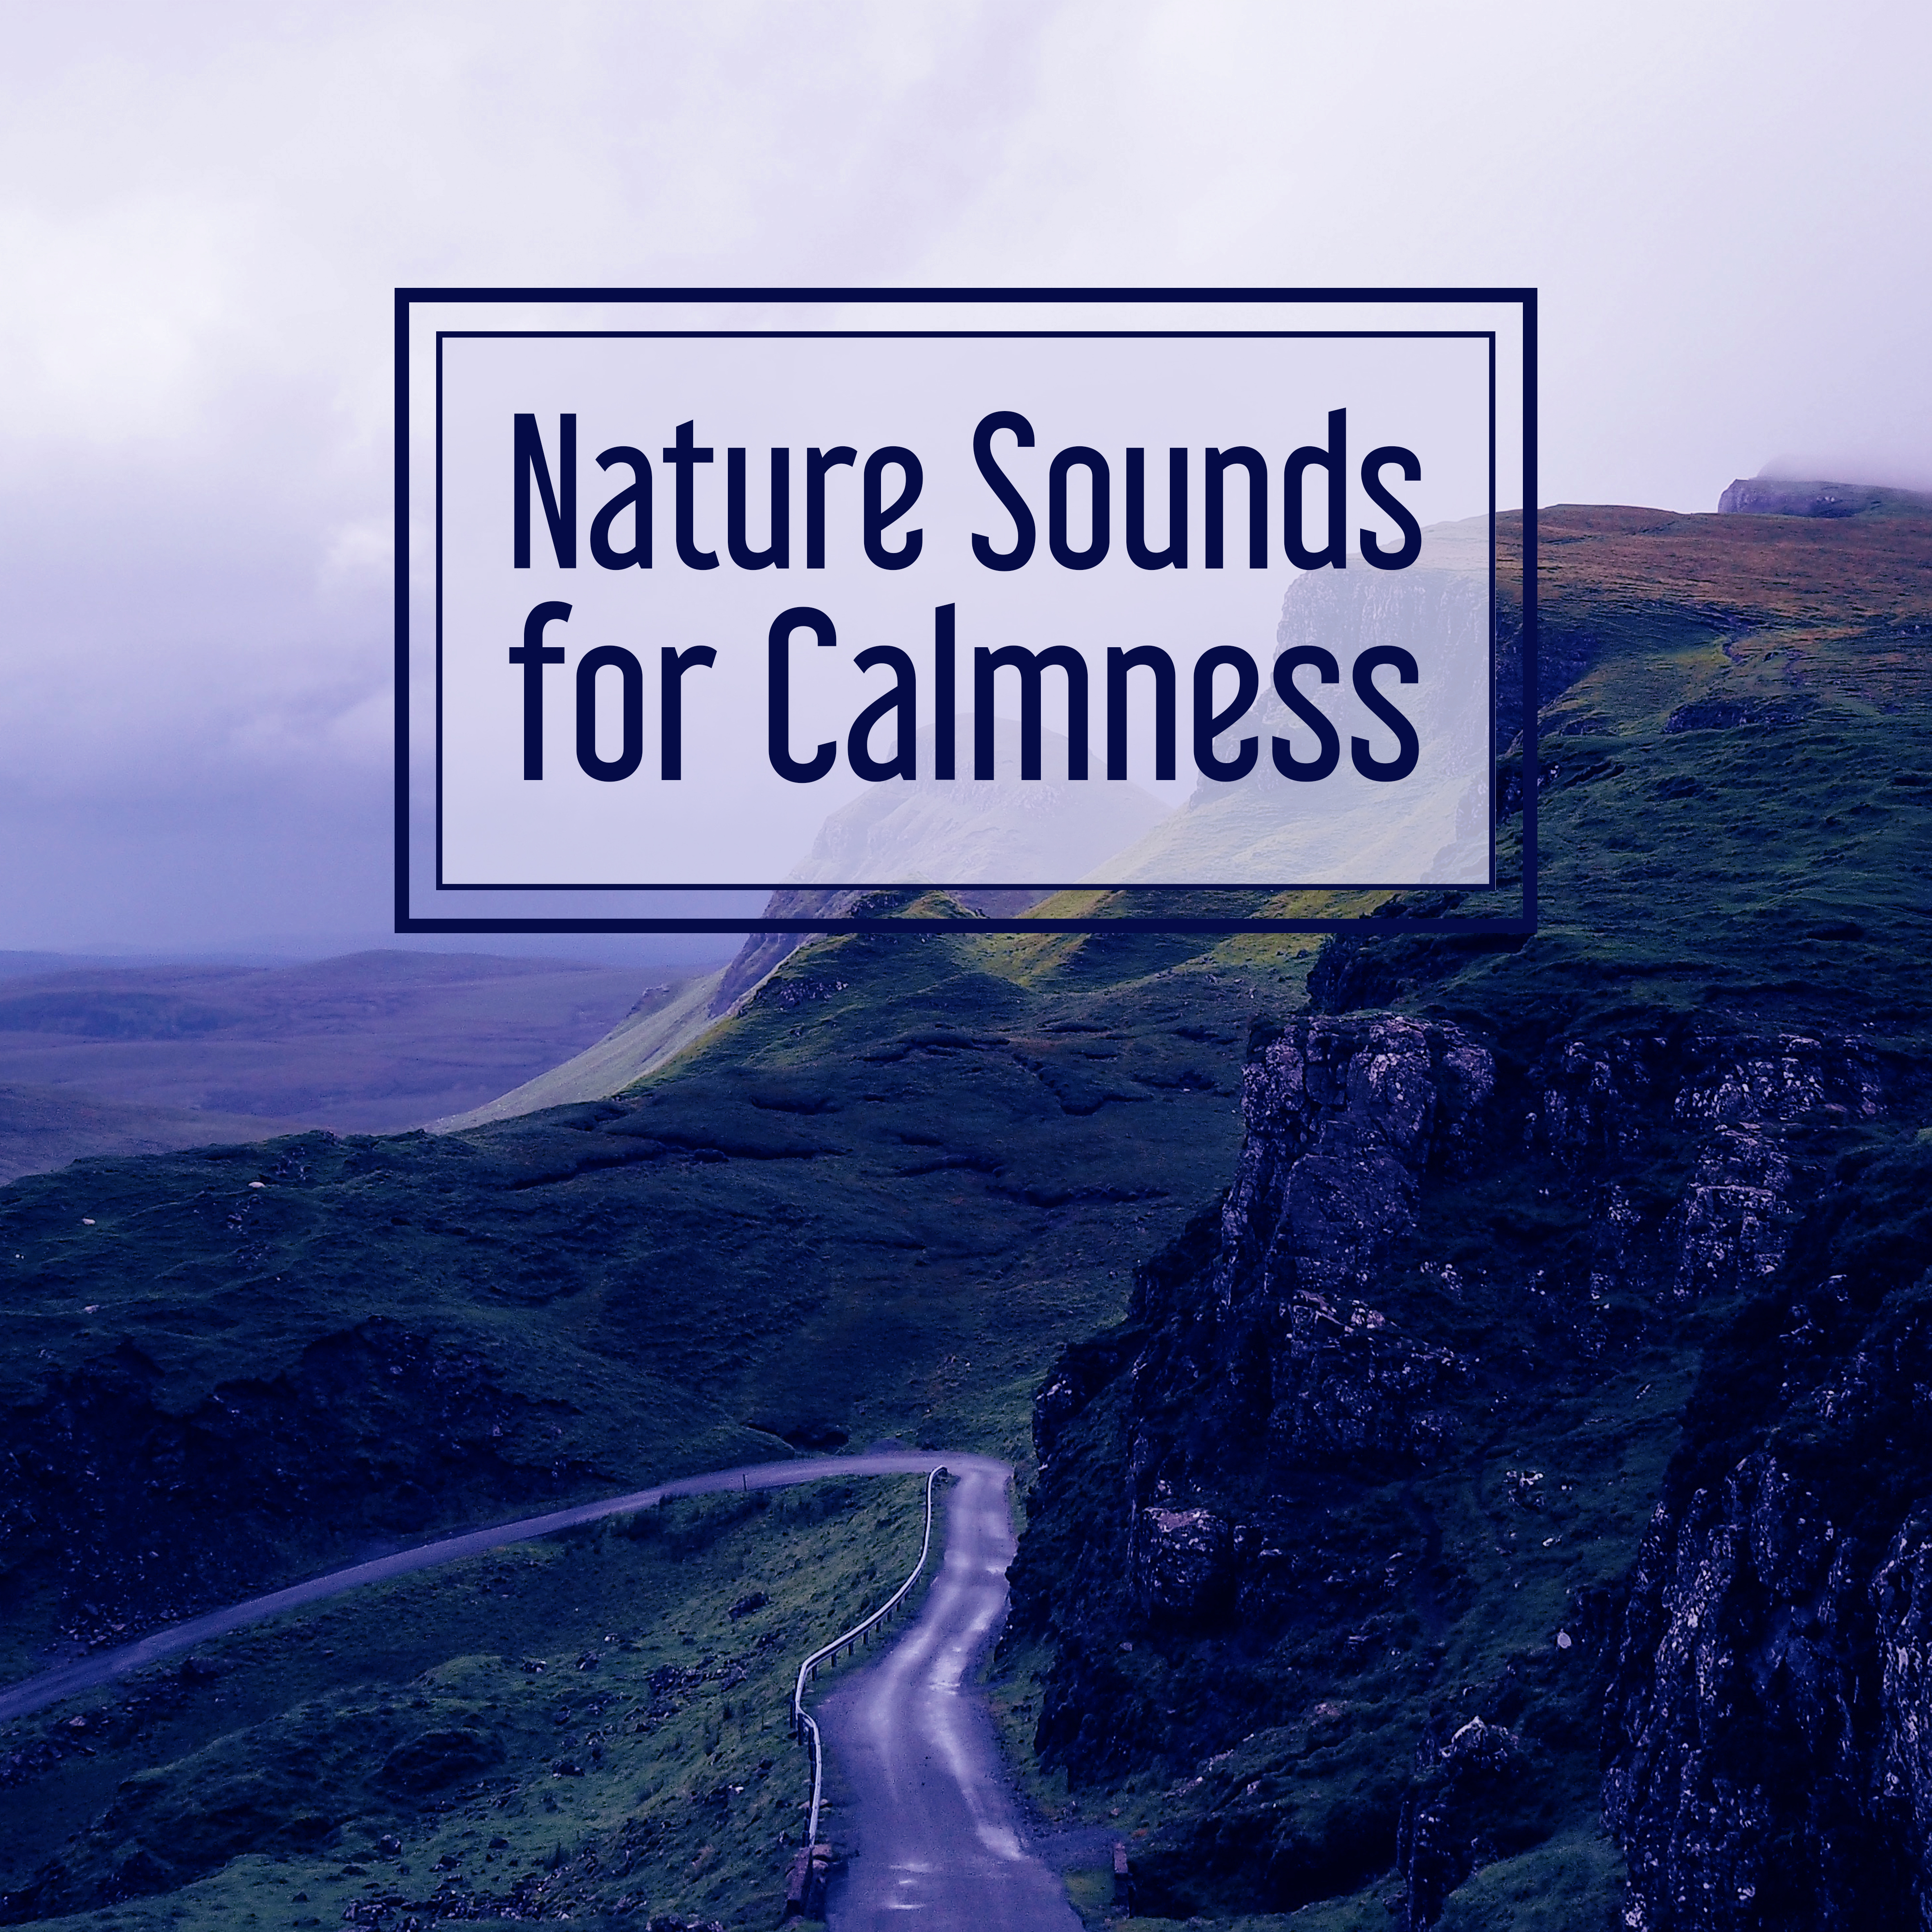 Nature Sounds for Calmness – Music for Relaxation, Soothing Rain, Pure Mind, Deep Sleep, Peaceful Music, Total Relax